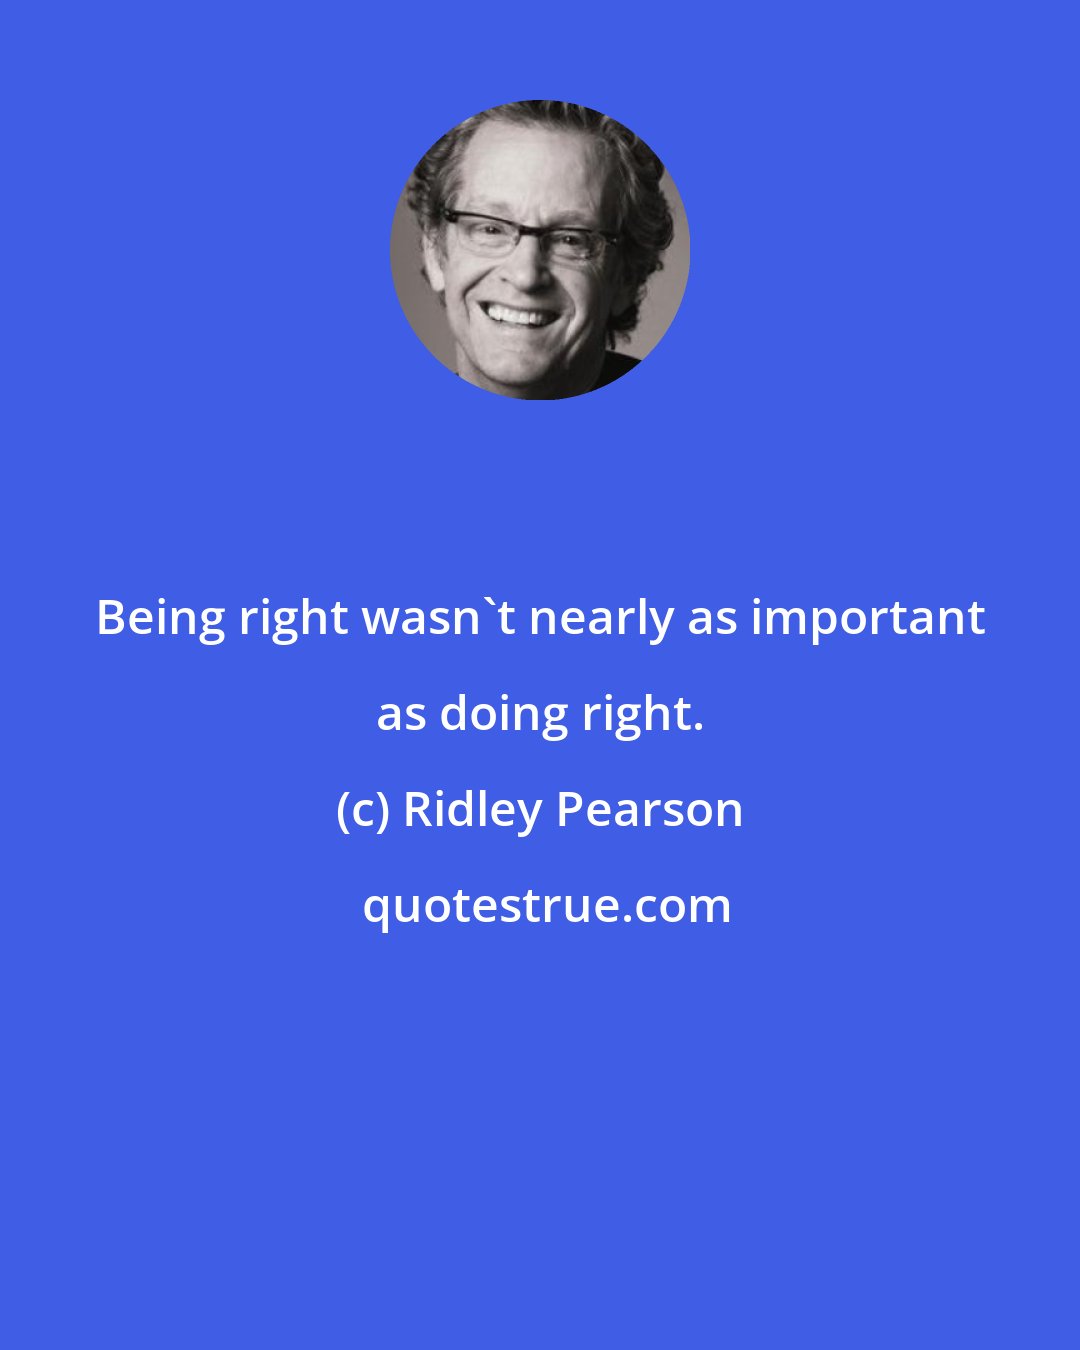 Ridley Pearson: Being right wasn't nearly as important as doing right.